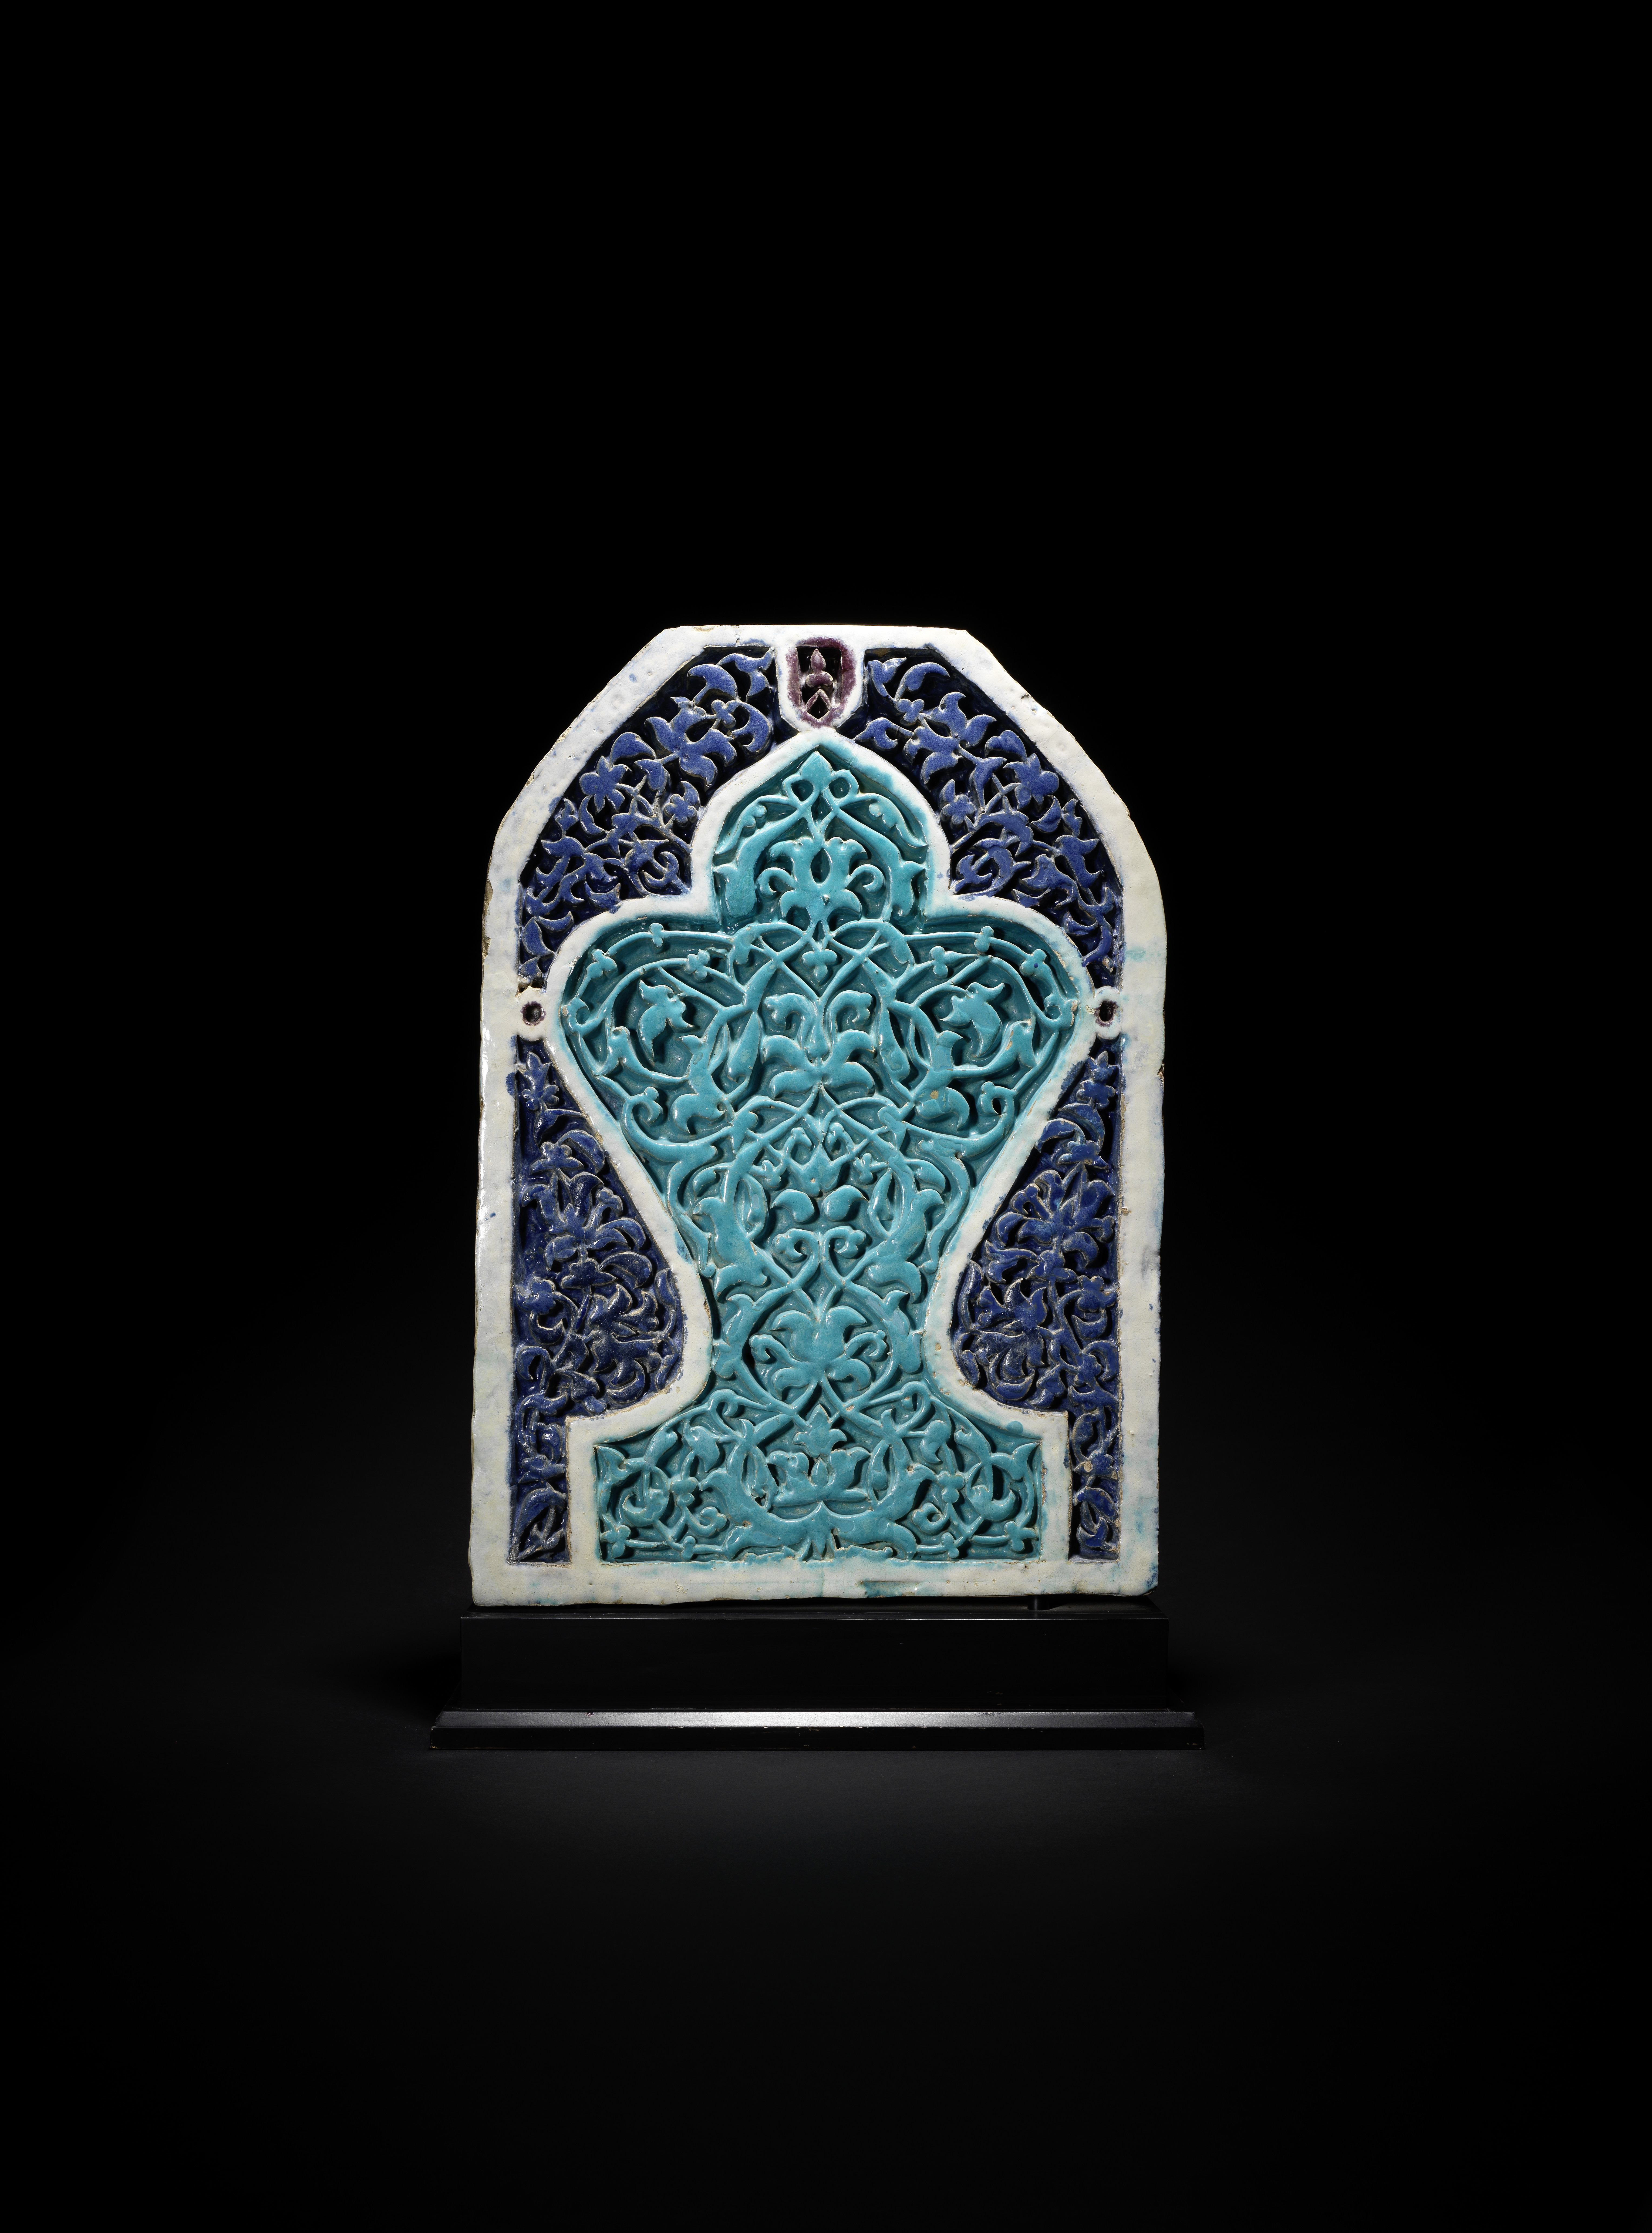 A Timurid moulded pottery mihrab tile Central Asia, second half of the 14th Century